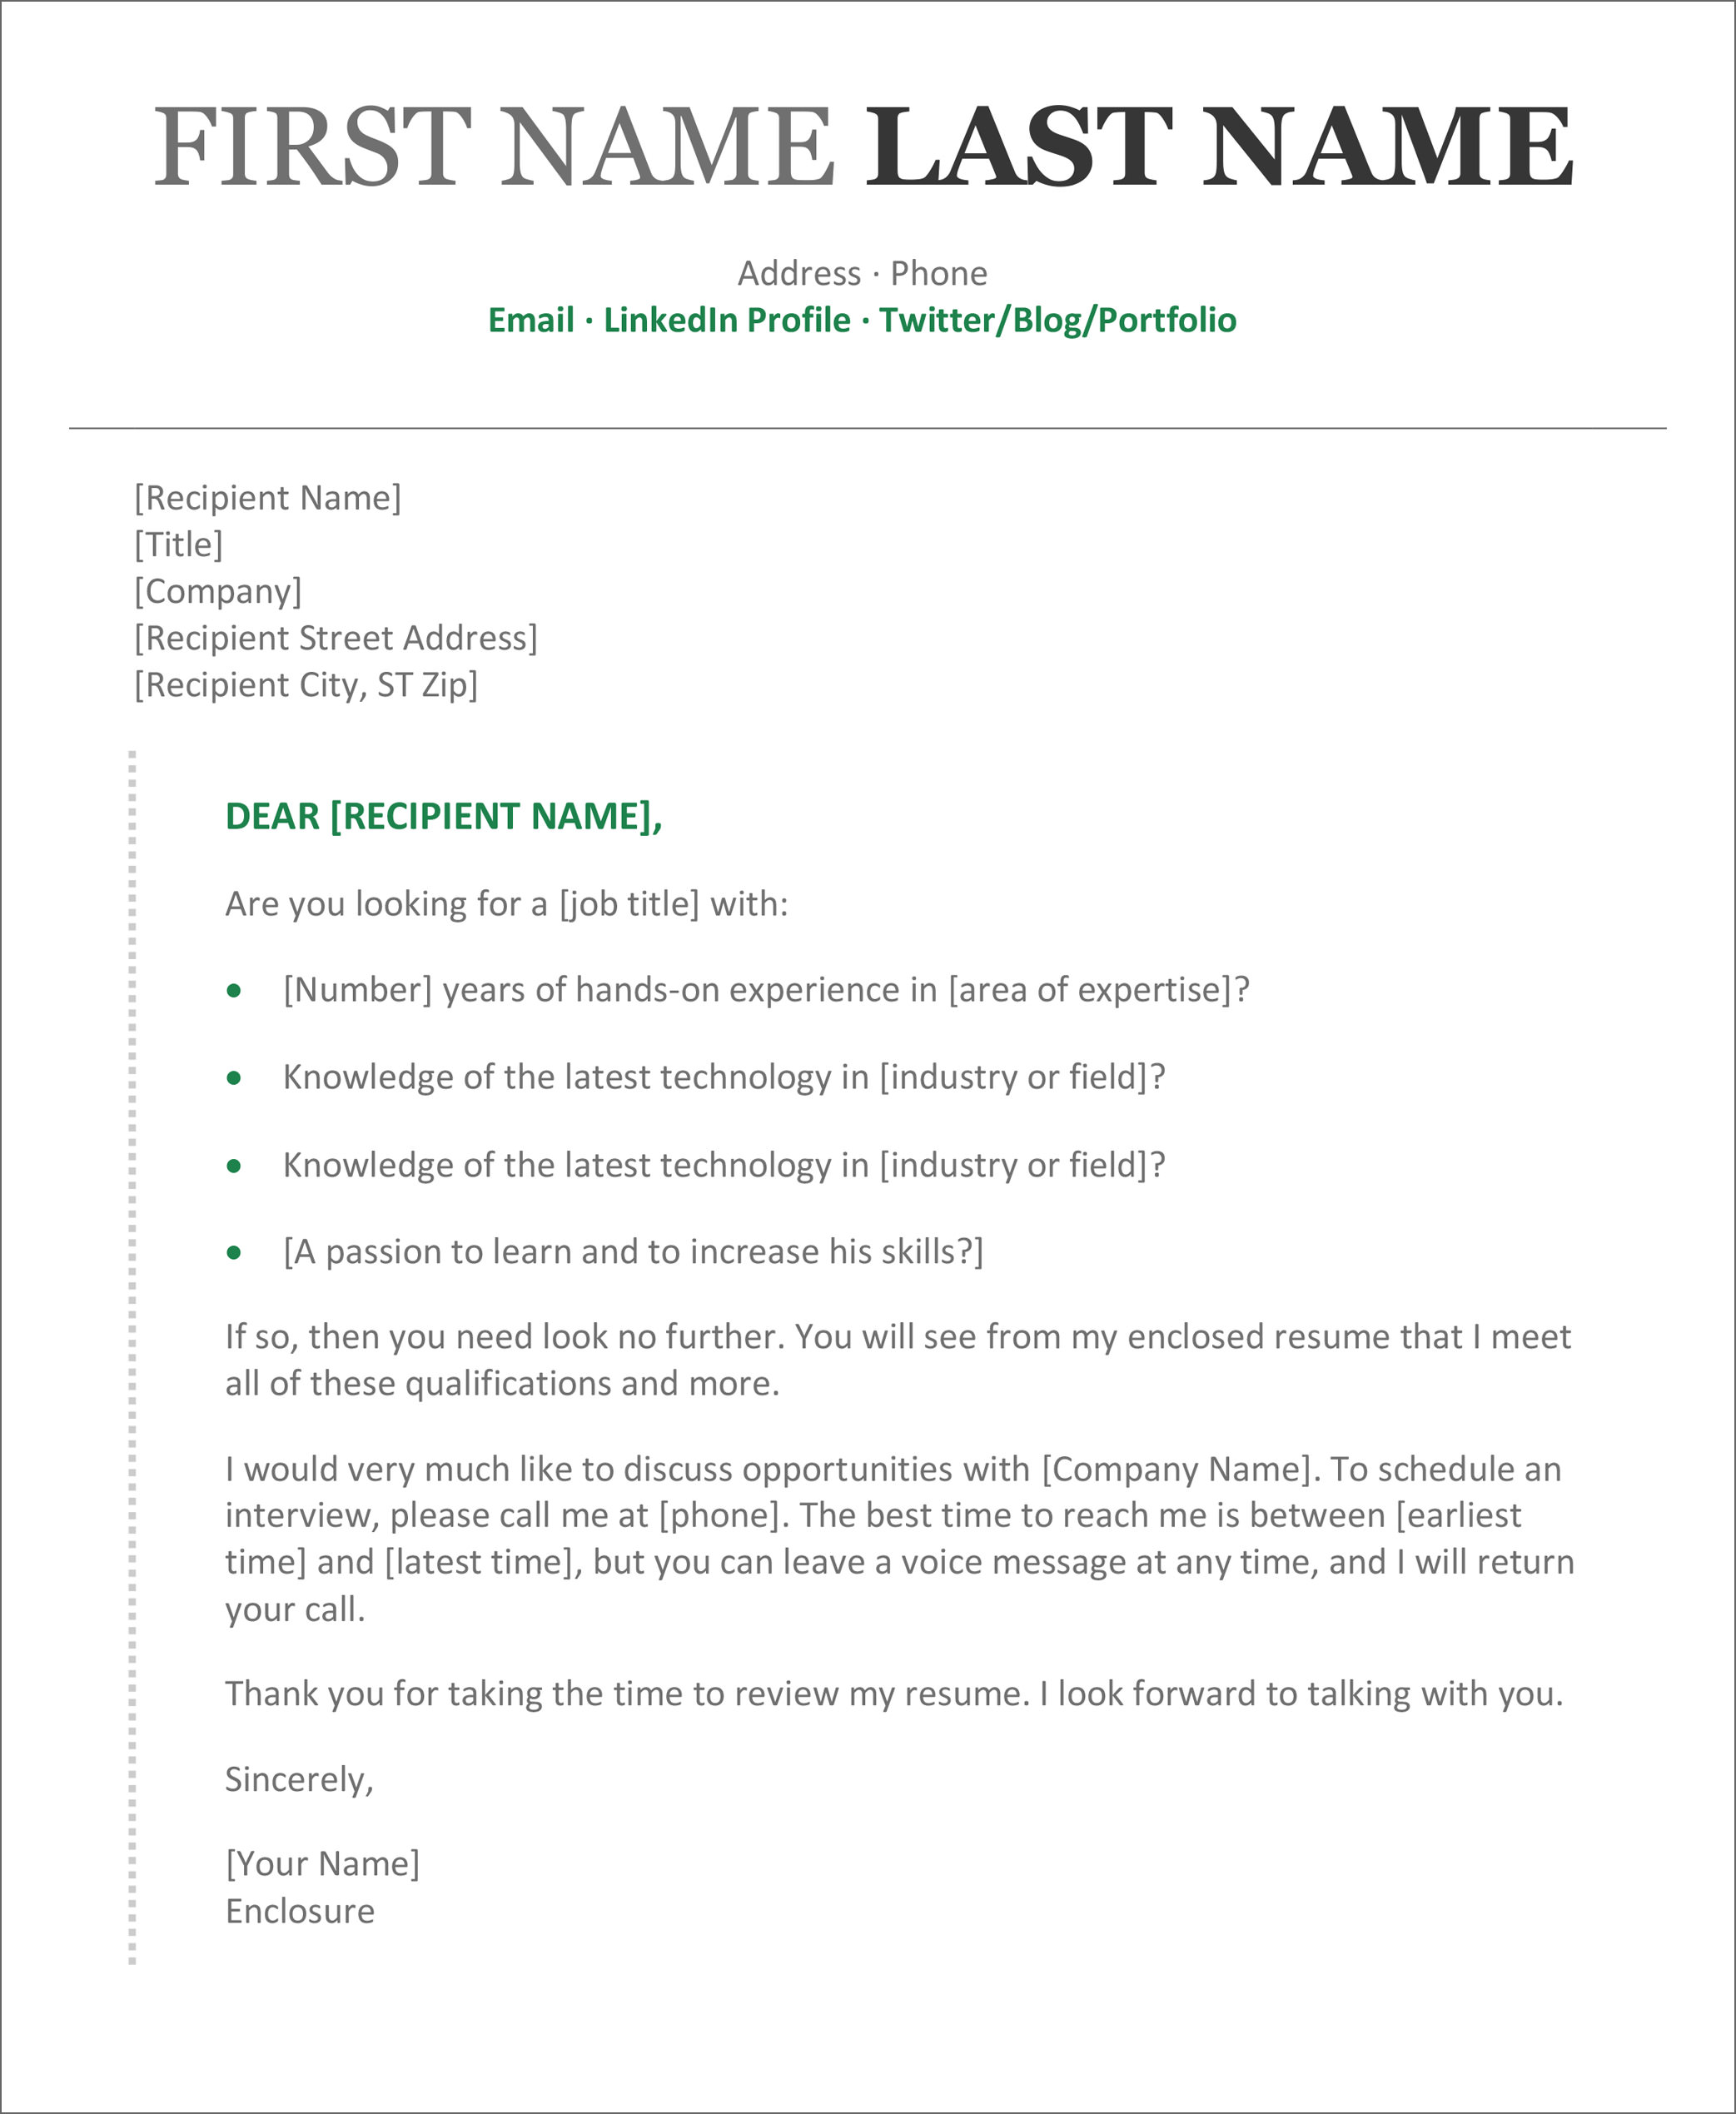 it-resume-cover-letter-design-blog-new-resume-and-cover-letter-a